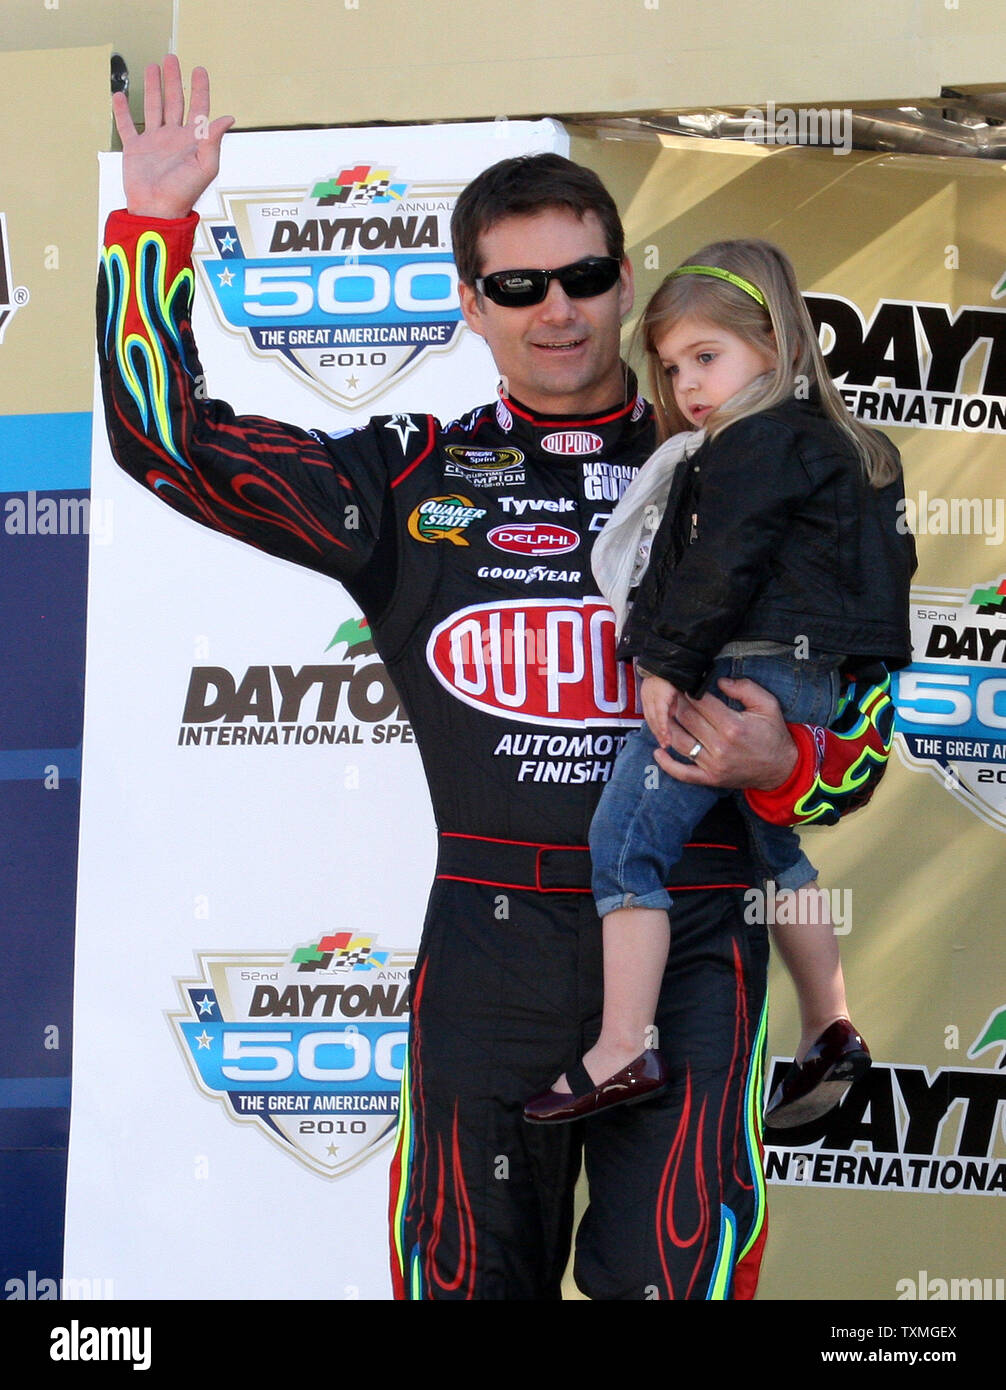 Jeff Gordon and his daughter Ella Sofia wave to the crowd during driver introductions prior to the start of the Daytona 500 at Daytona International Speedway in Daytona Beach, Florida on February 14, 2010. UPI Photo/Malcolm Hope Stock Photo